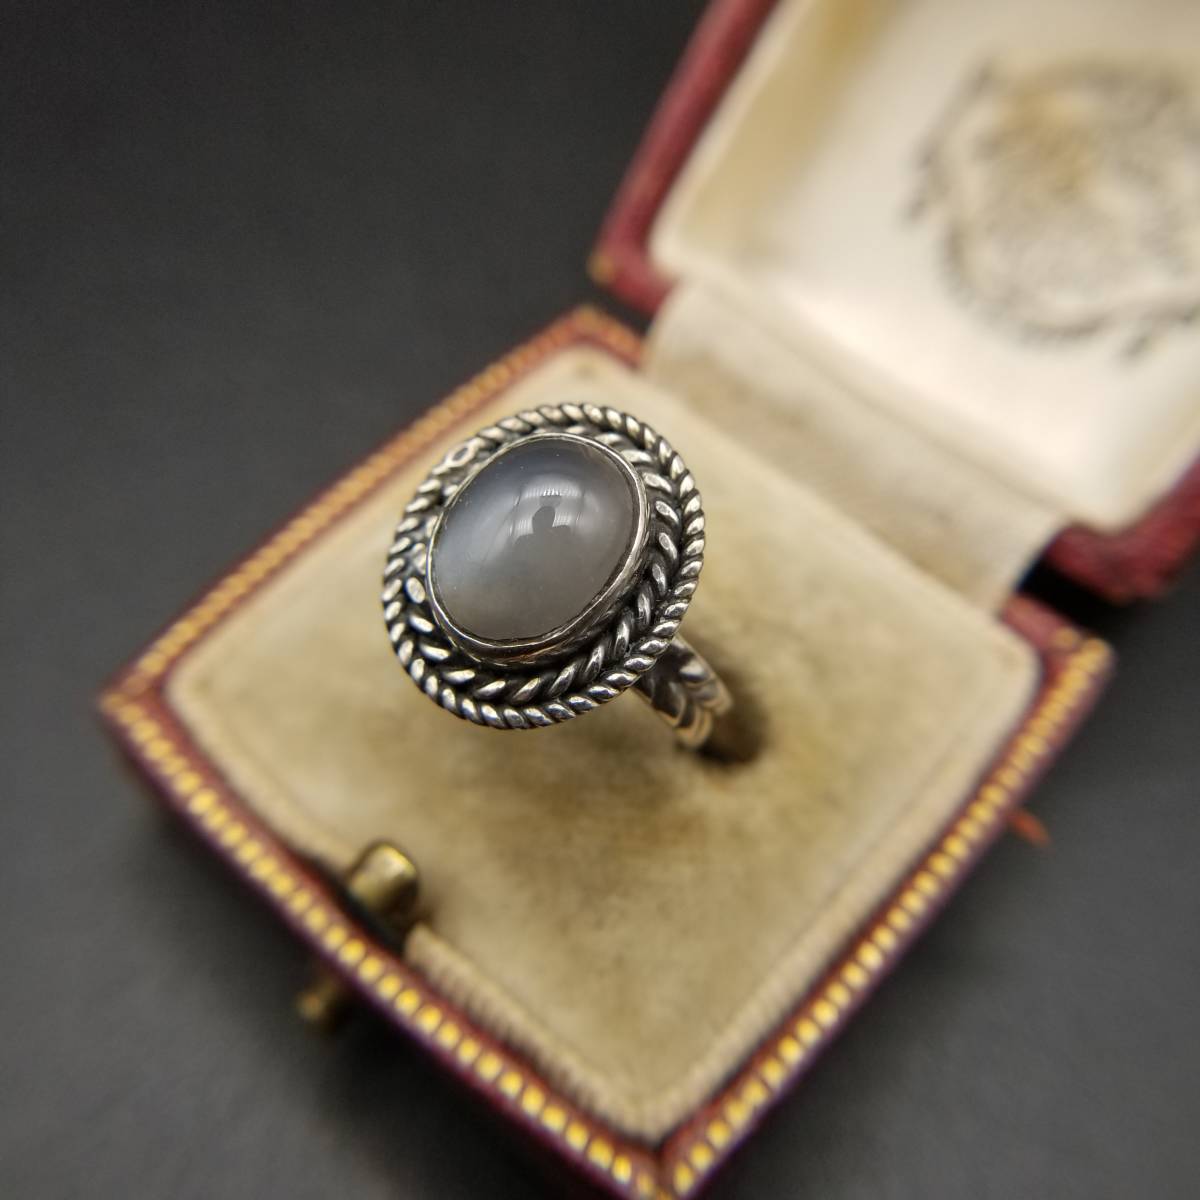  silver gray Stone three braided American Vintage te The Yinling g silver Showa Retro ring jewelry accessory N20